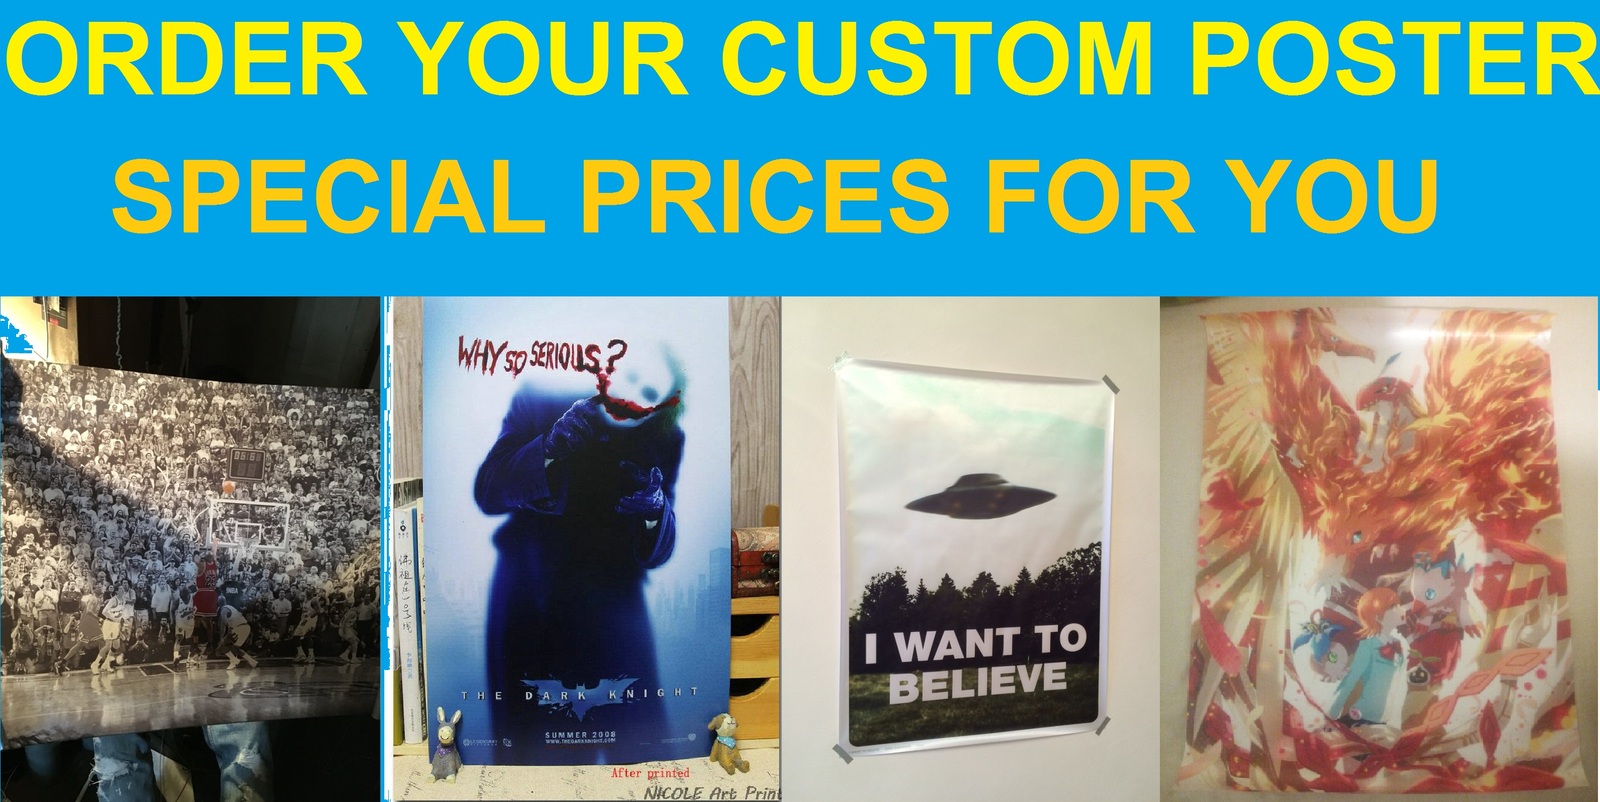 Custom Made Poster Design Your Own Art Print Size 11x17 14x21 24x36 27x40 32x48